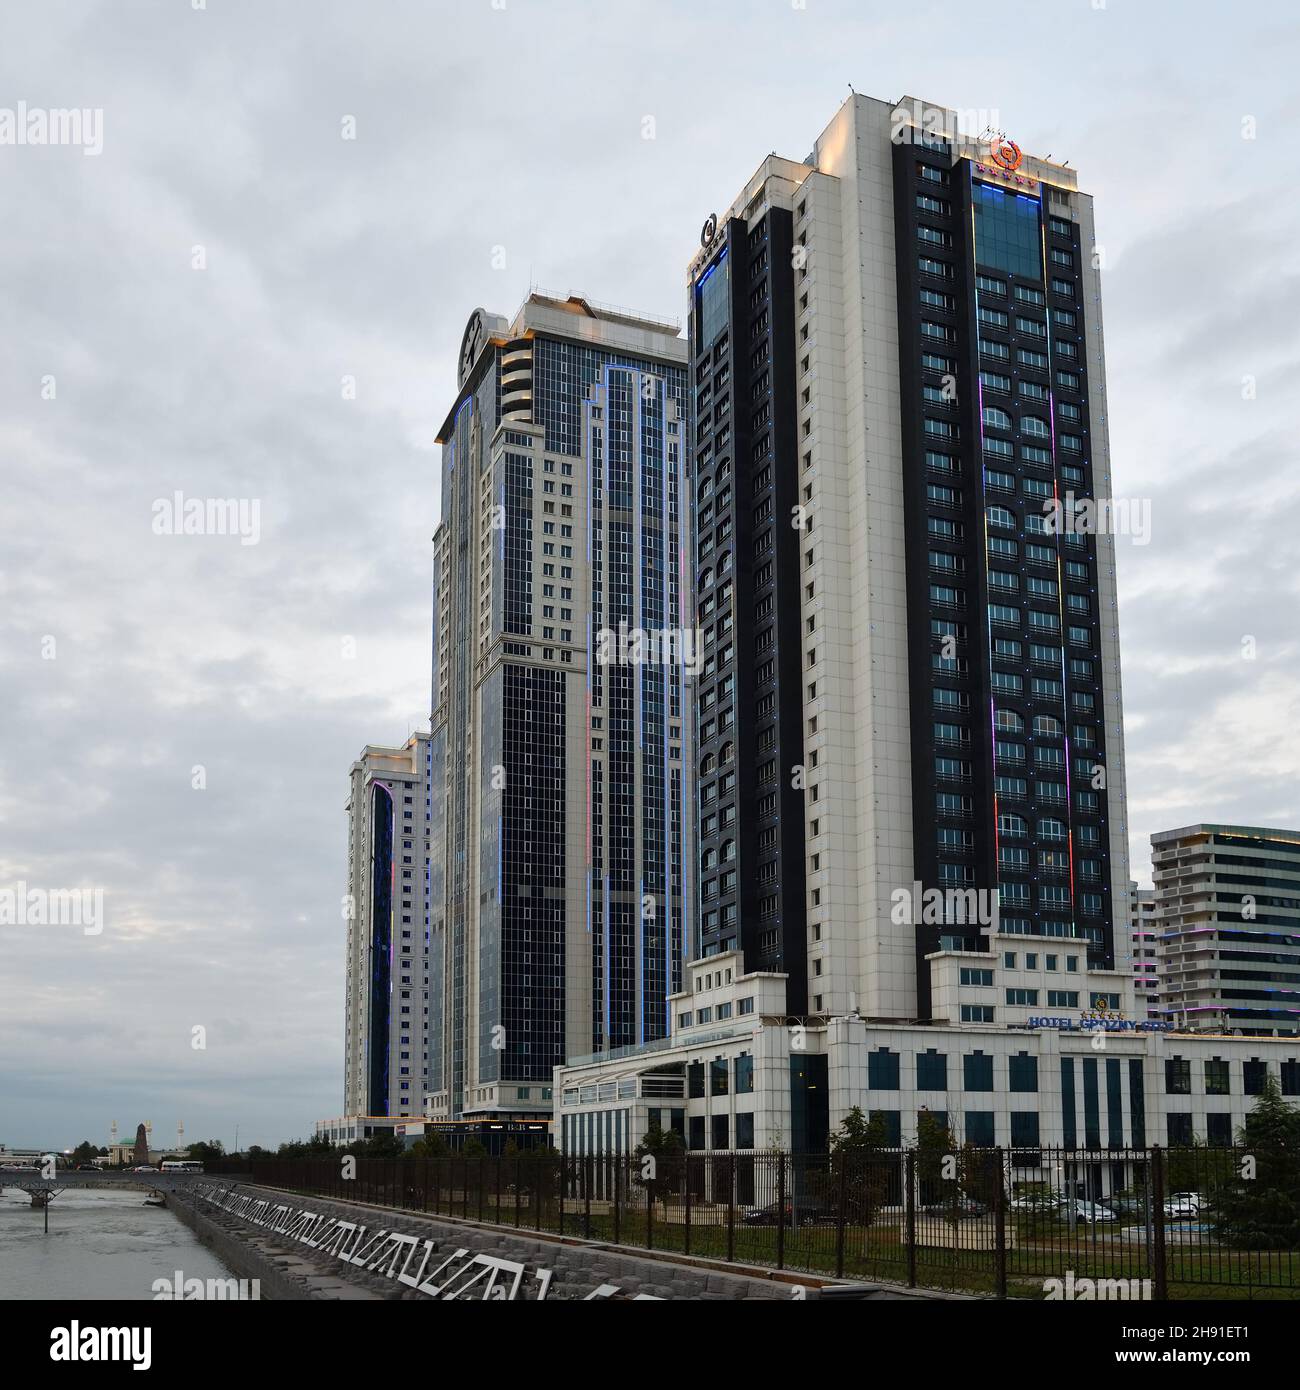 Grozny, Russia - Sept 13, 2021: View on  the skyscrapes in capital city of the Chechen Republic in the Russian Federation Stock Photo